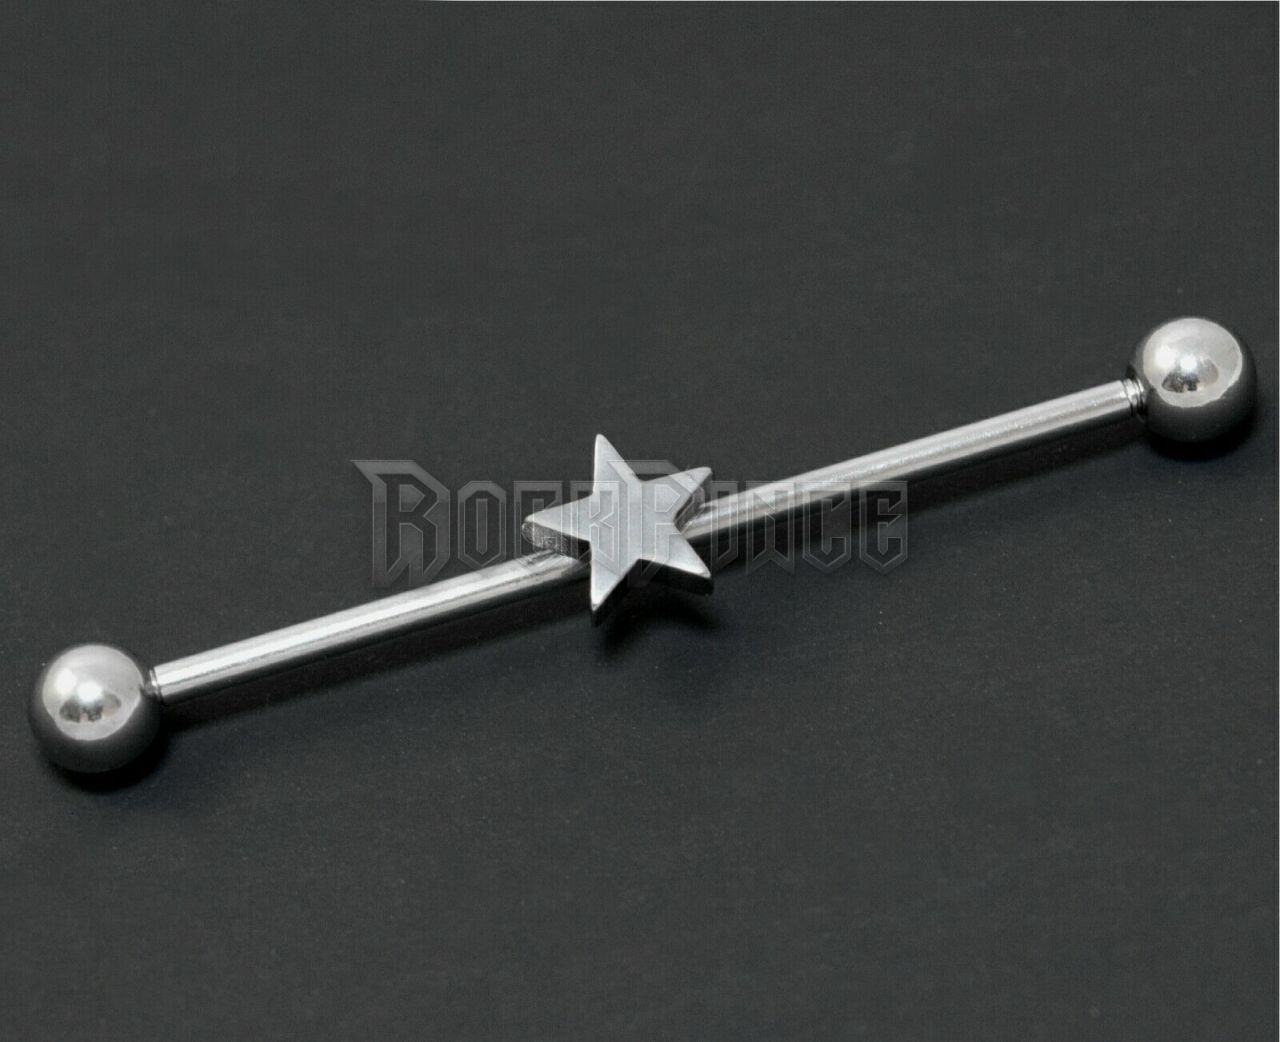 Industrial barbell with star - piercing